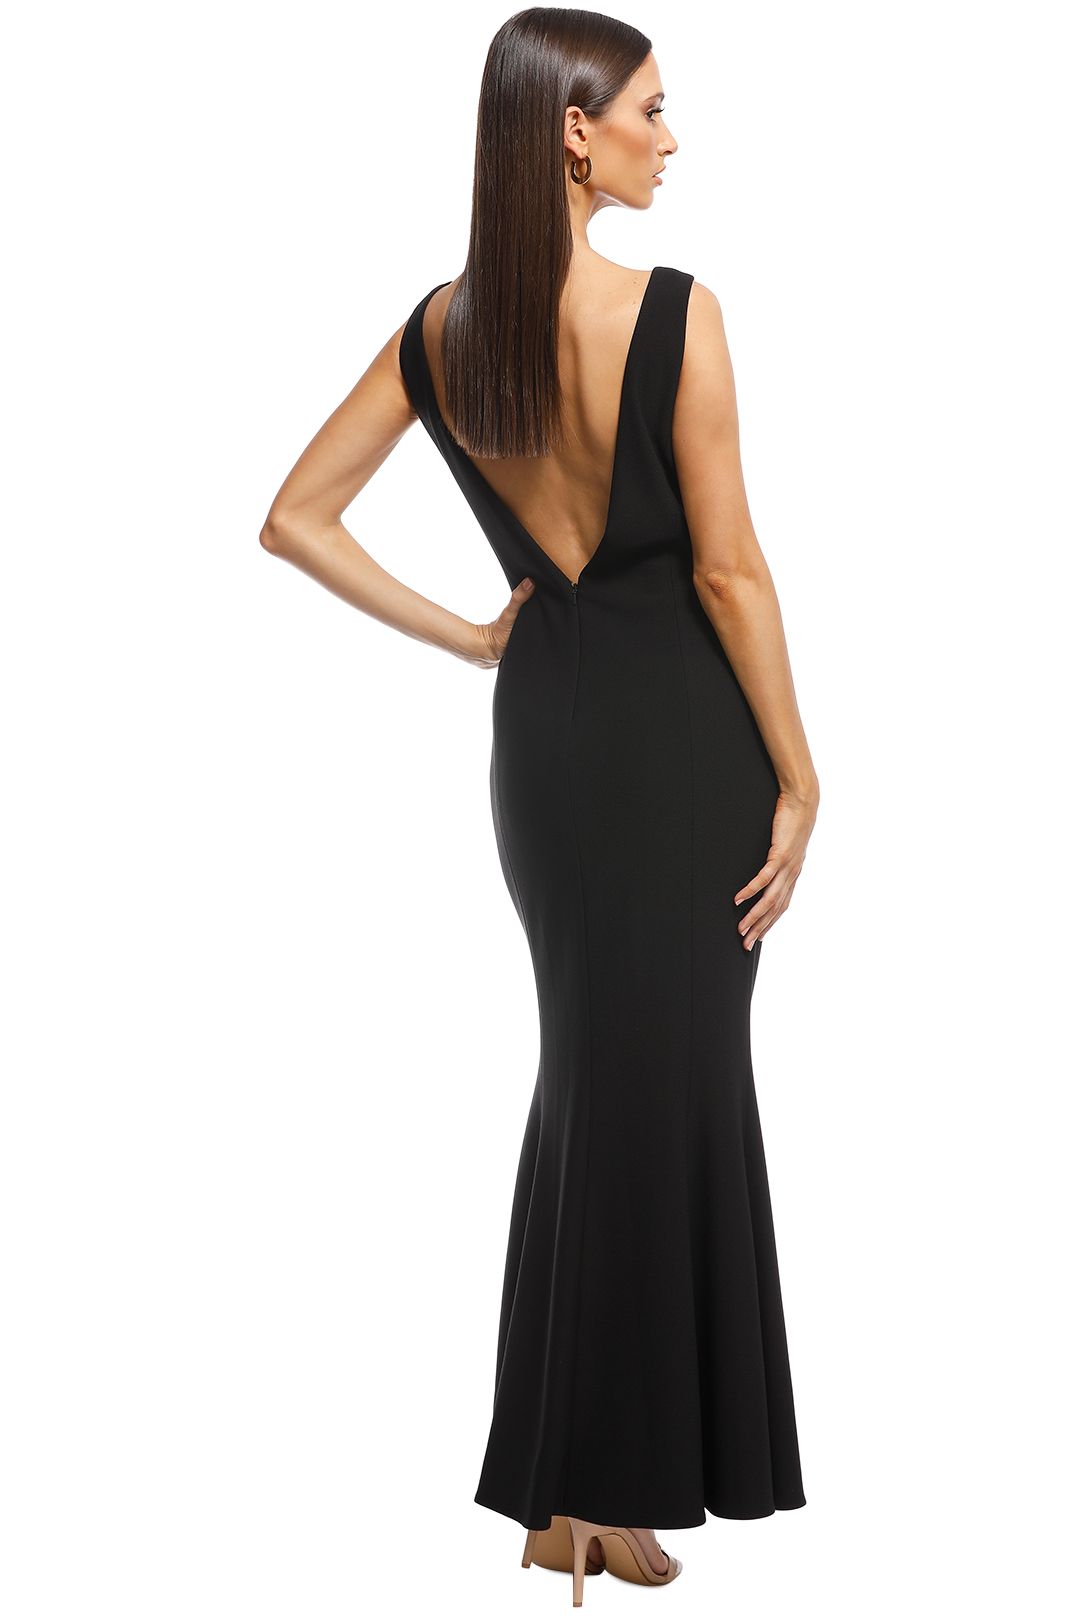 Eternal Obsession Gown in Black by Grace & Hart for Rent